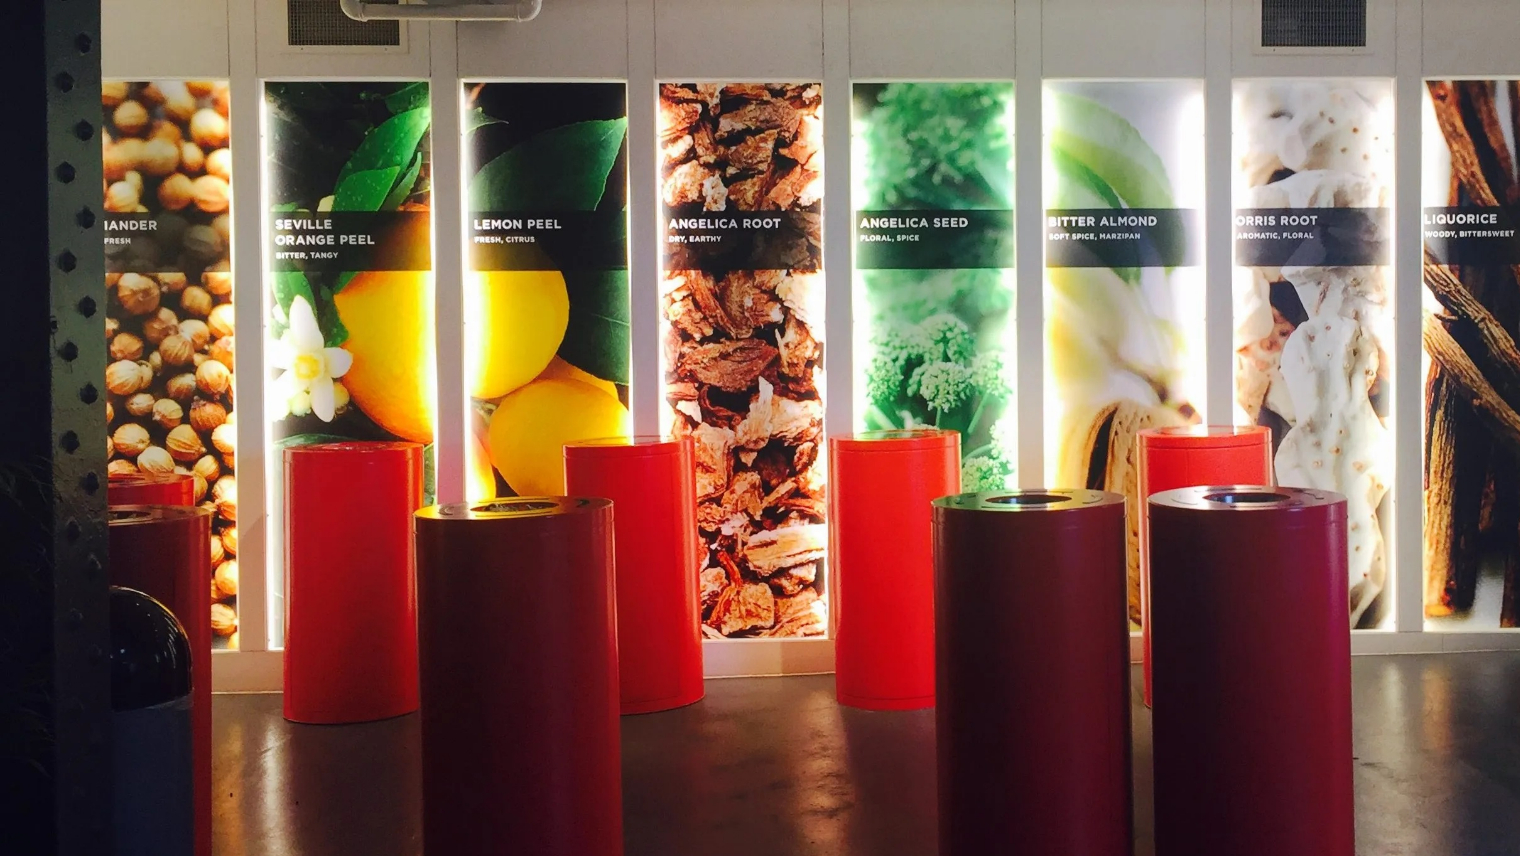 An ingredients display at the Beefeater Gin Distillery